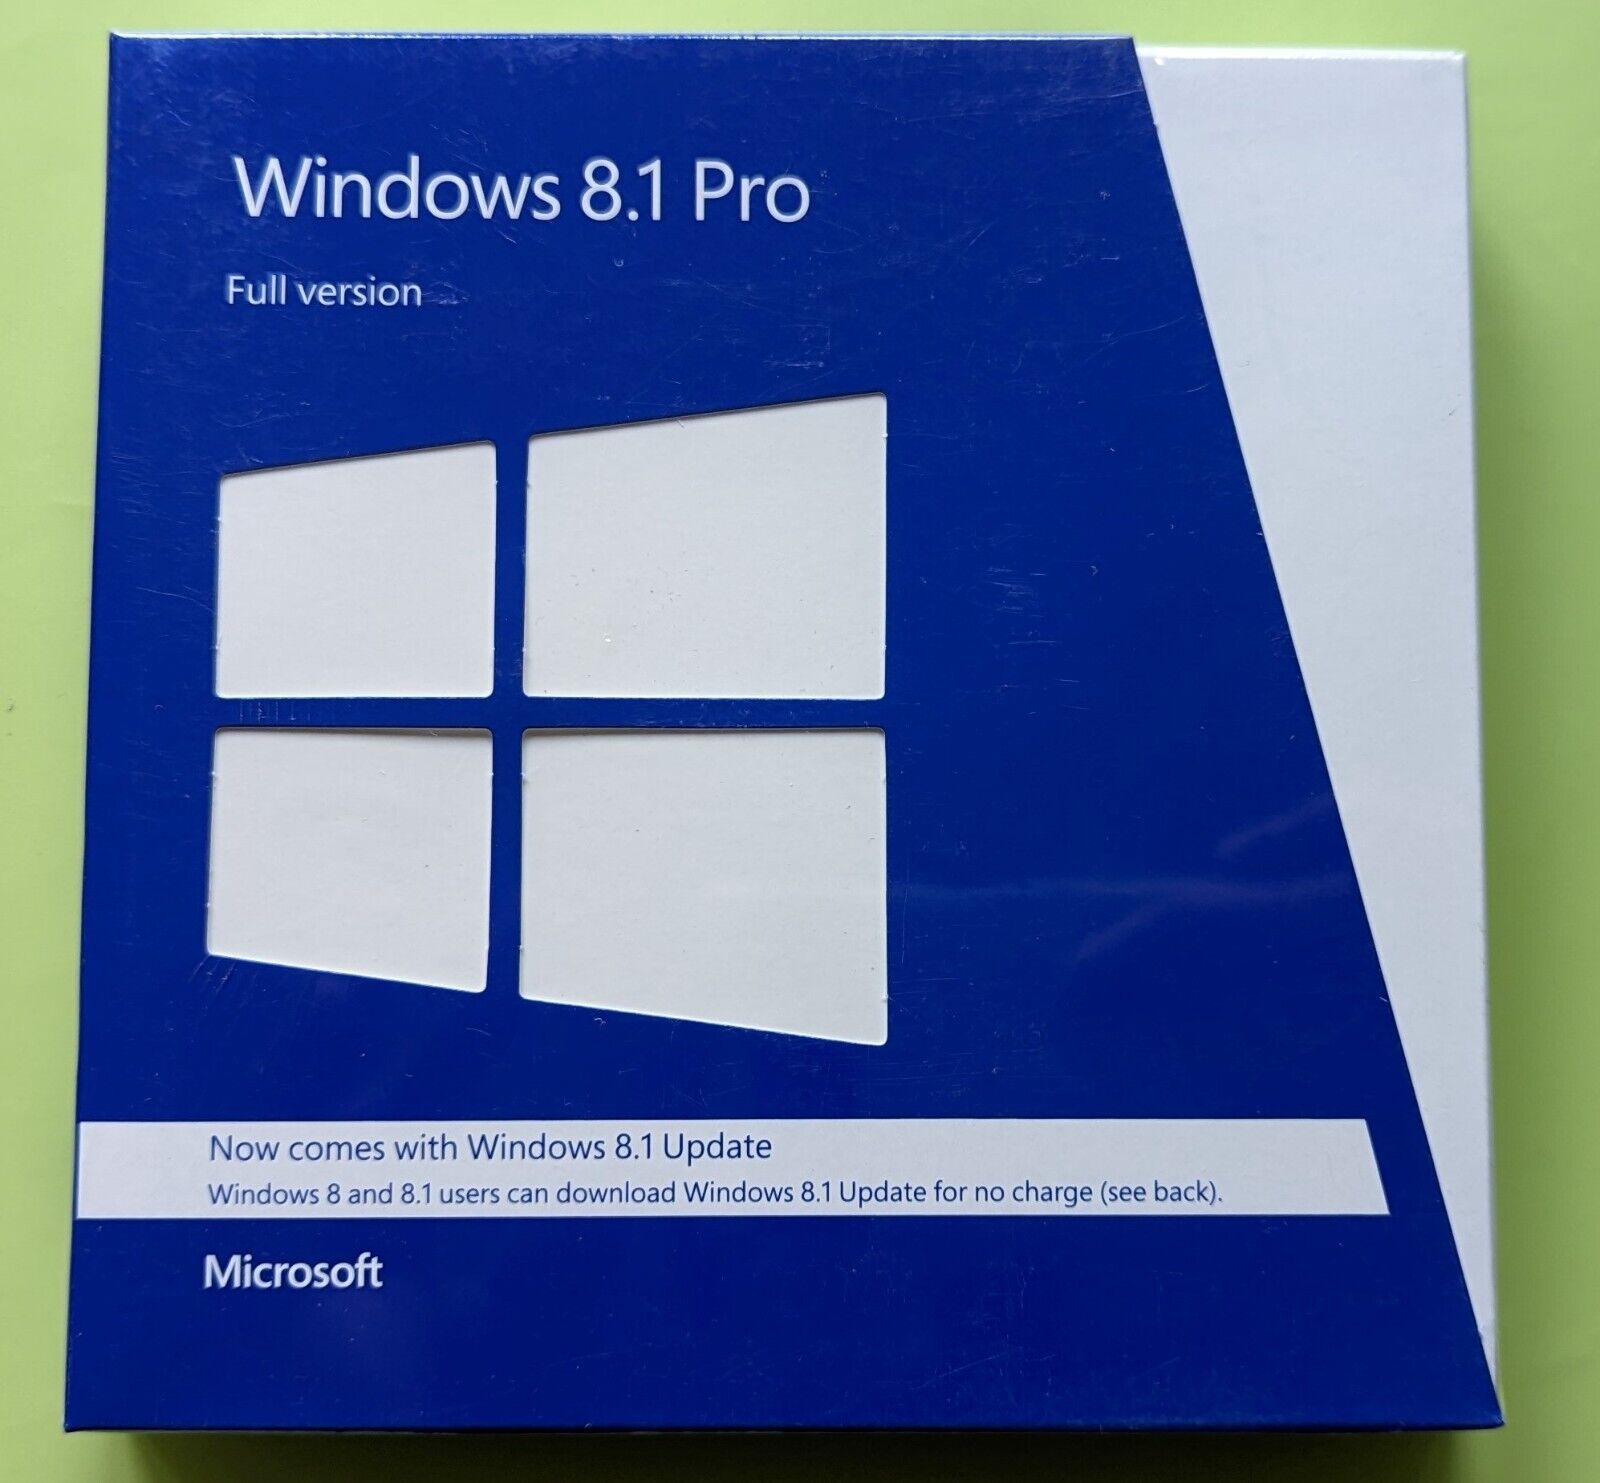 Microsoft Windows 8.1 Pro Full Version (PC) Boxed 32 & 64 bit Included Sealed